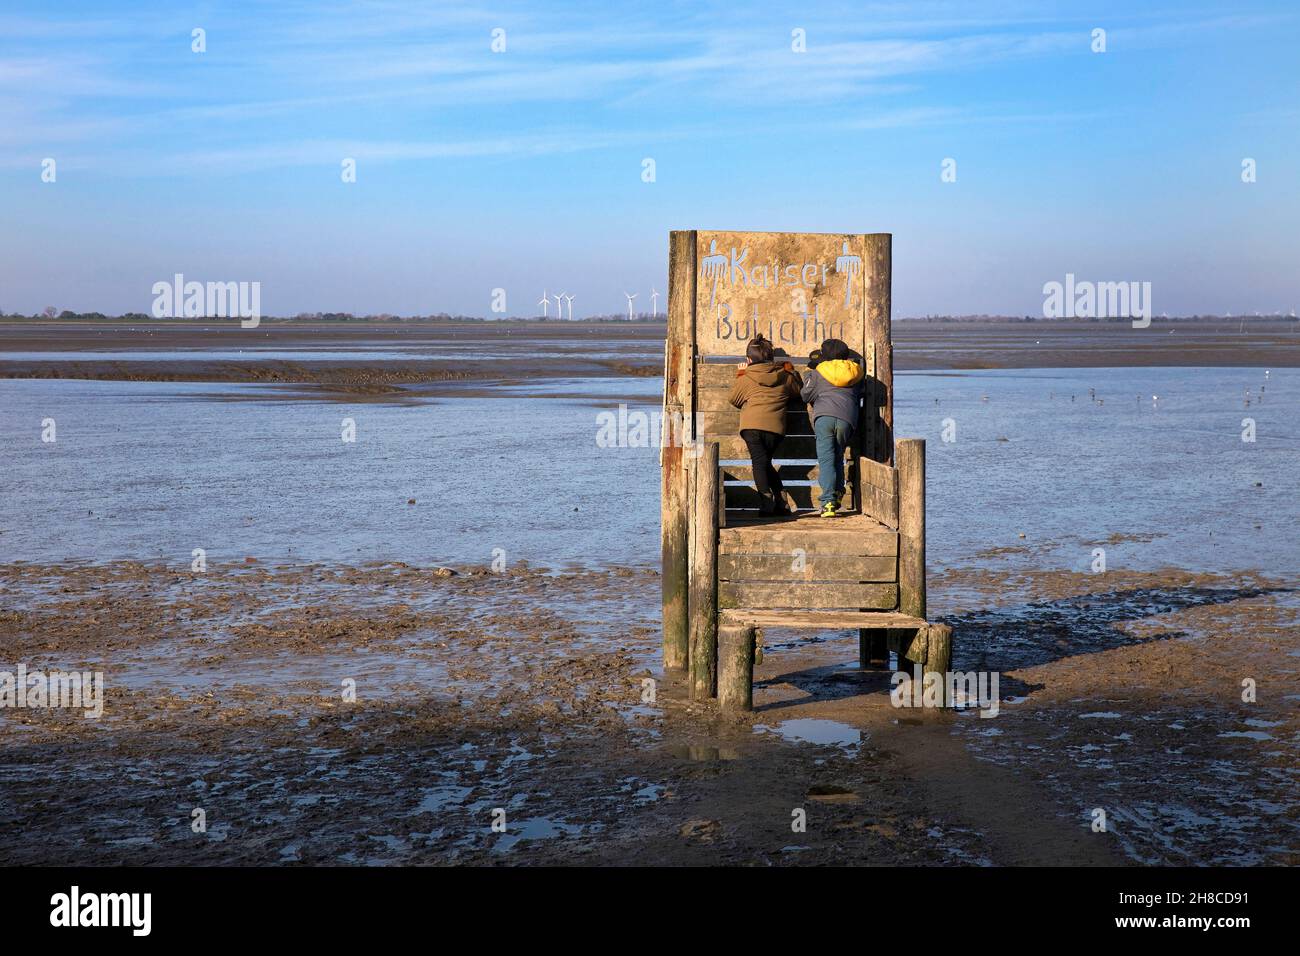 children on the scultpure Kaiserthron, watching the wadden sea, Germany, Lower Saxony, East Frisia, Dangast Stock Photo